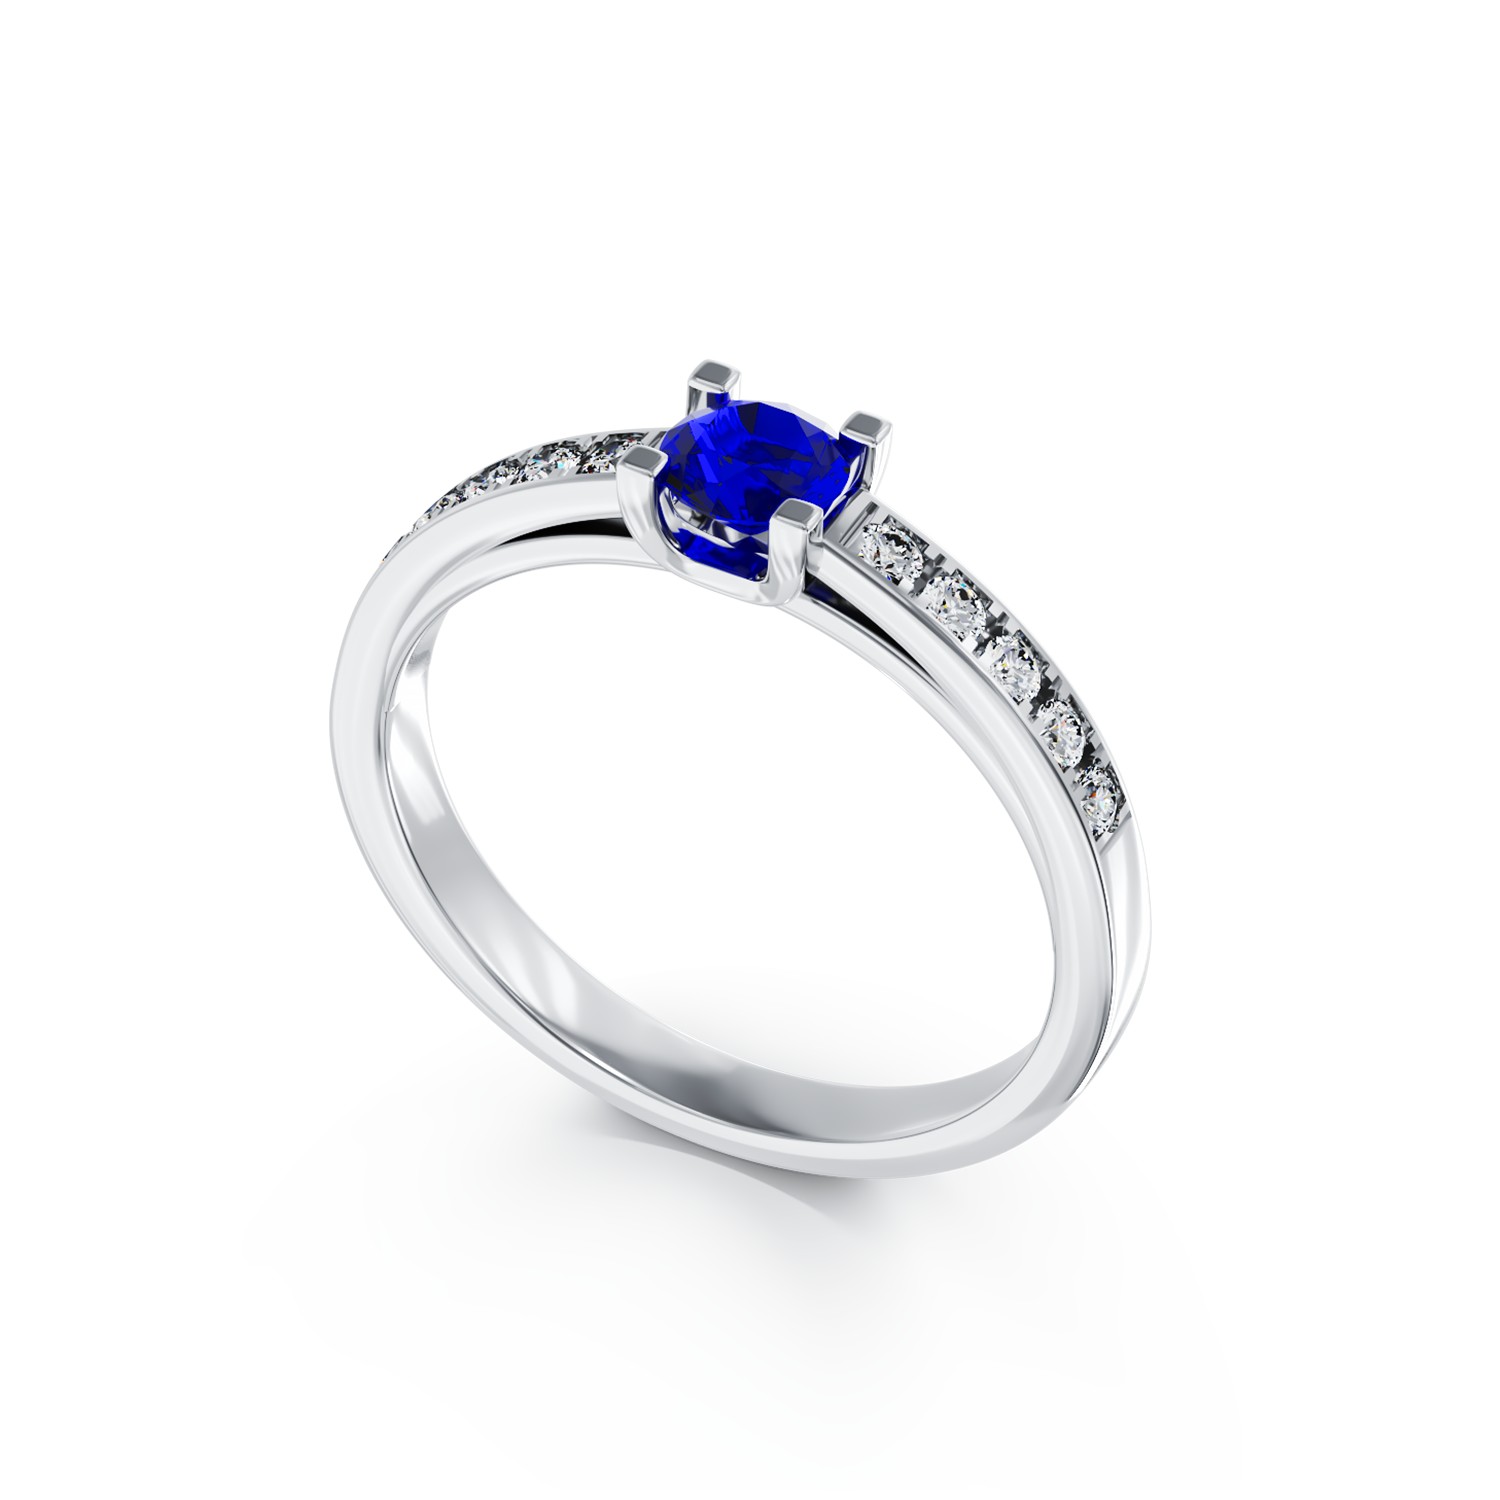 18K white gold engagement ring with 0.368ct sapphire and 0.134ct diamonds